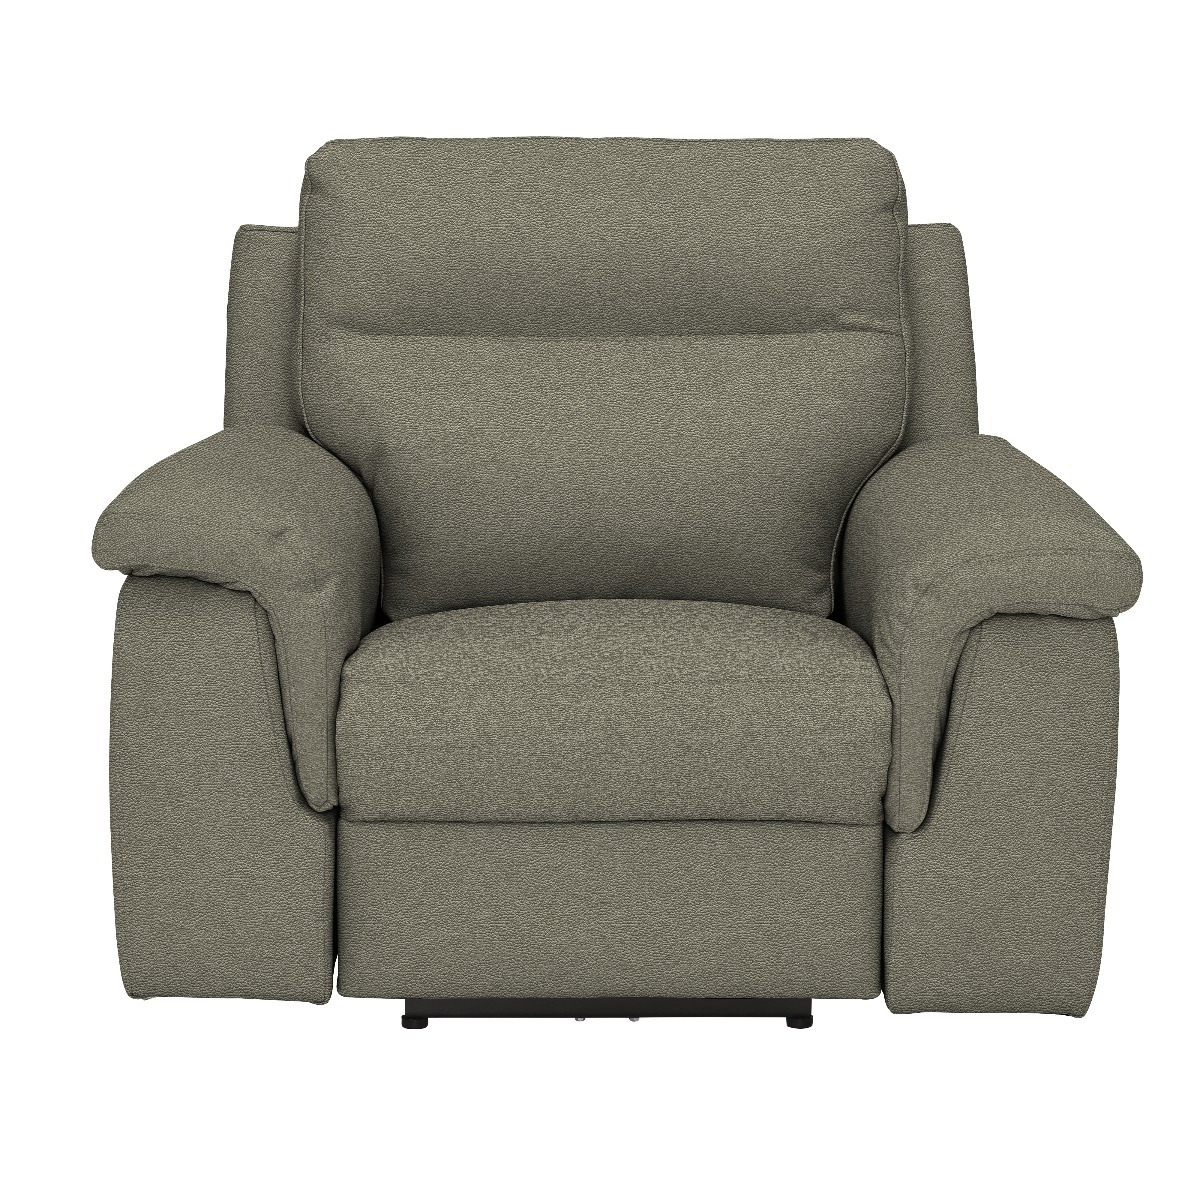 Fulton Recliner Chair With Electric Recliner, Neutral Leather - Barker & Stonehouse - image 1